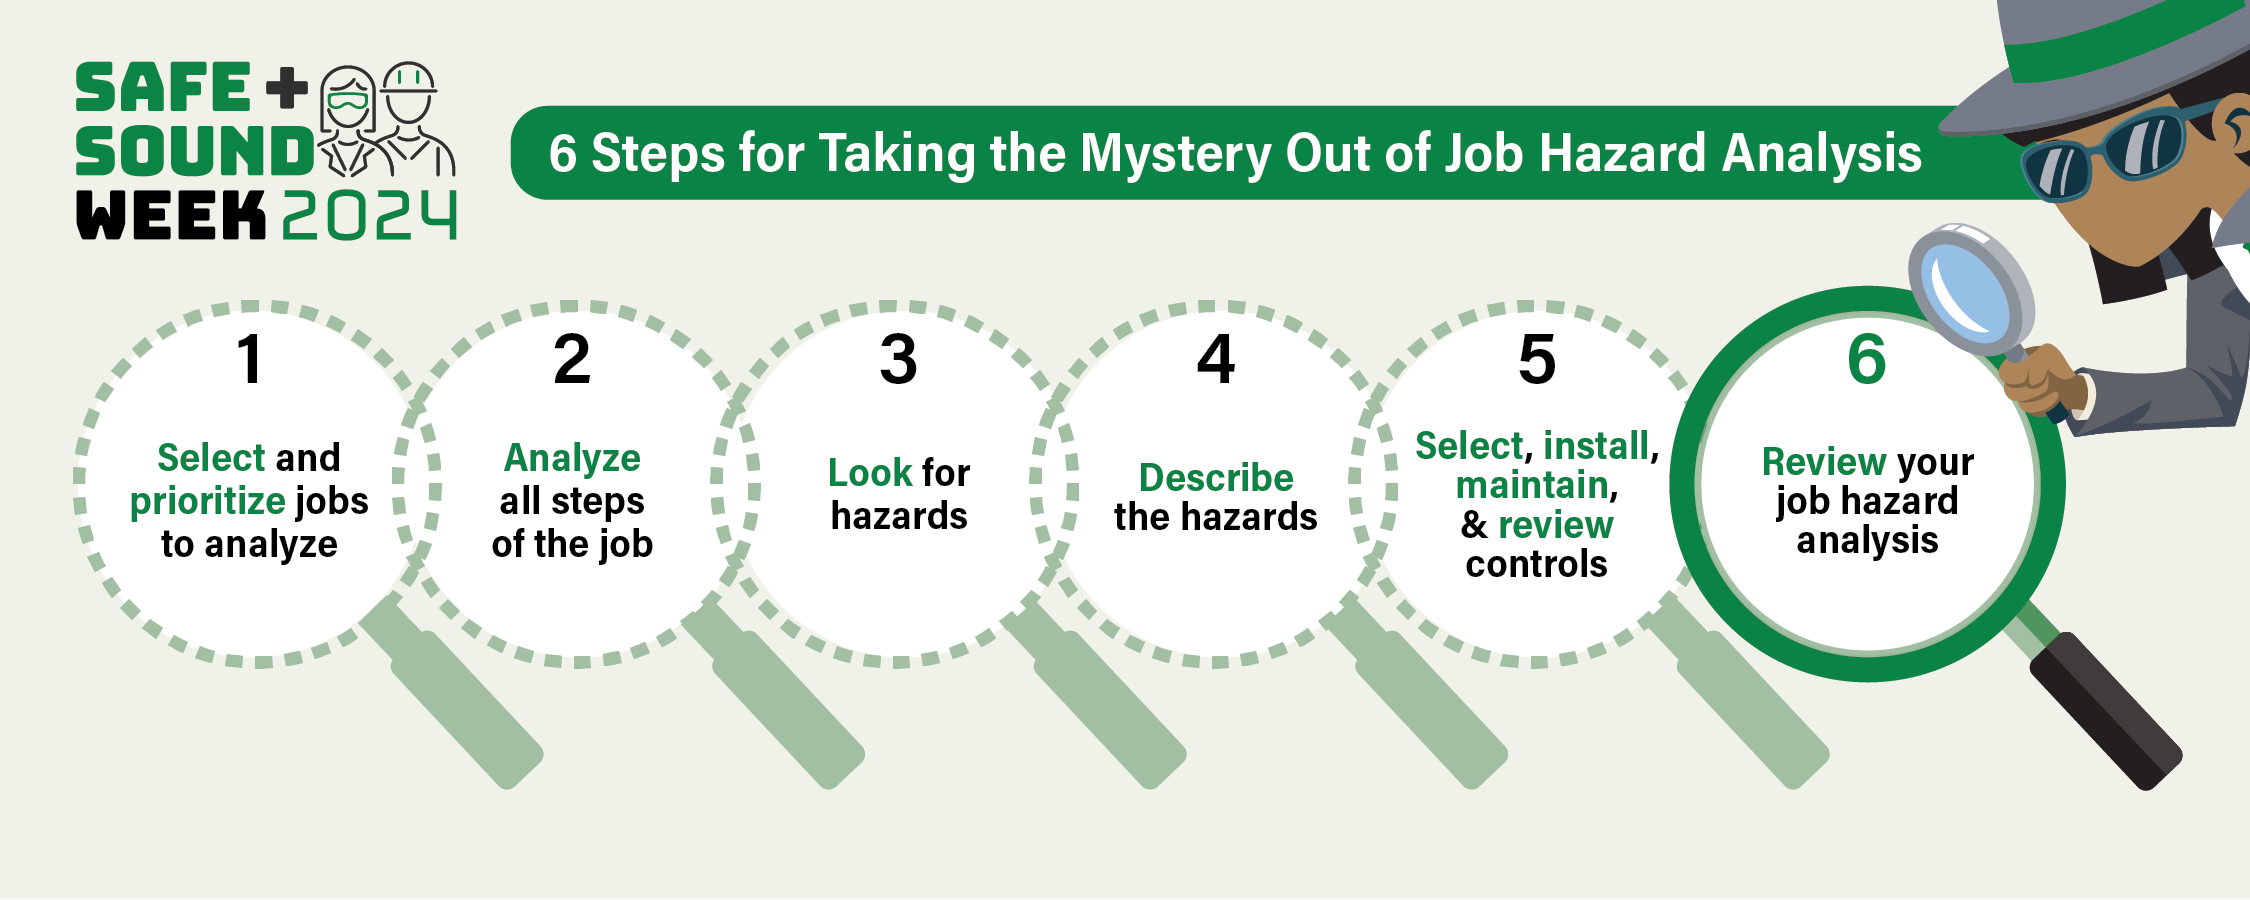 An infographic showing 6 steps for taking the mystery out of job hazard analysis. 1: Select and prioritize jobs to analyze. 2: Analyze all steps of the job. 3: Look for hazards. 4: Describe the hazards. 5. Select, install, maintain and review controls. 6. Review your job hazard analysis.